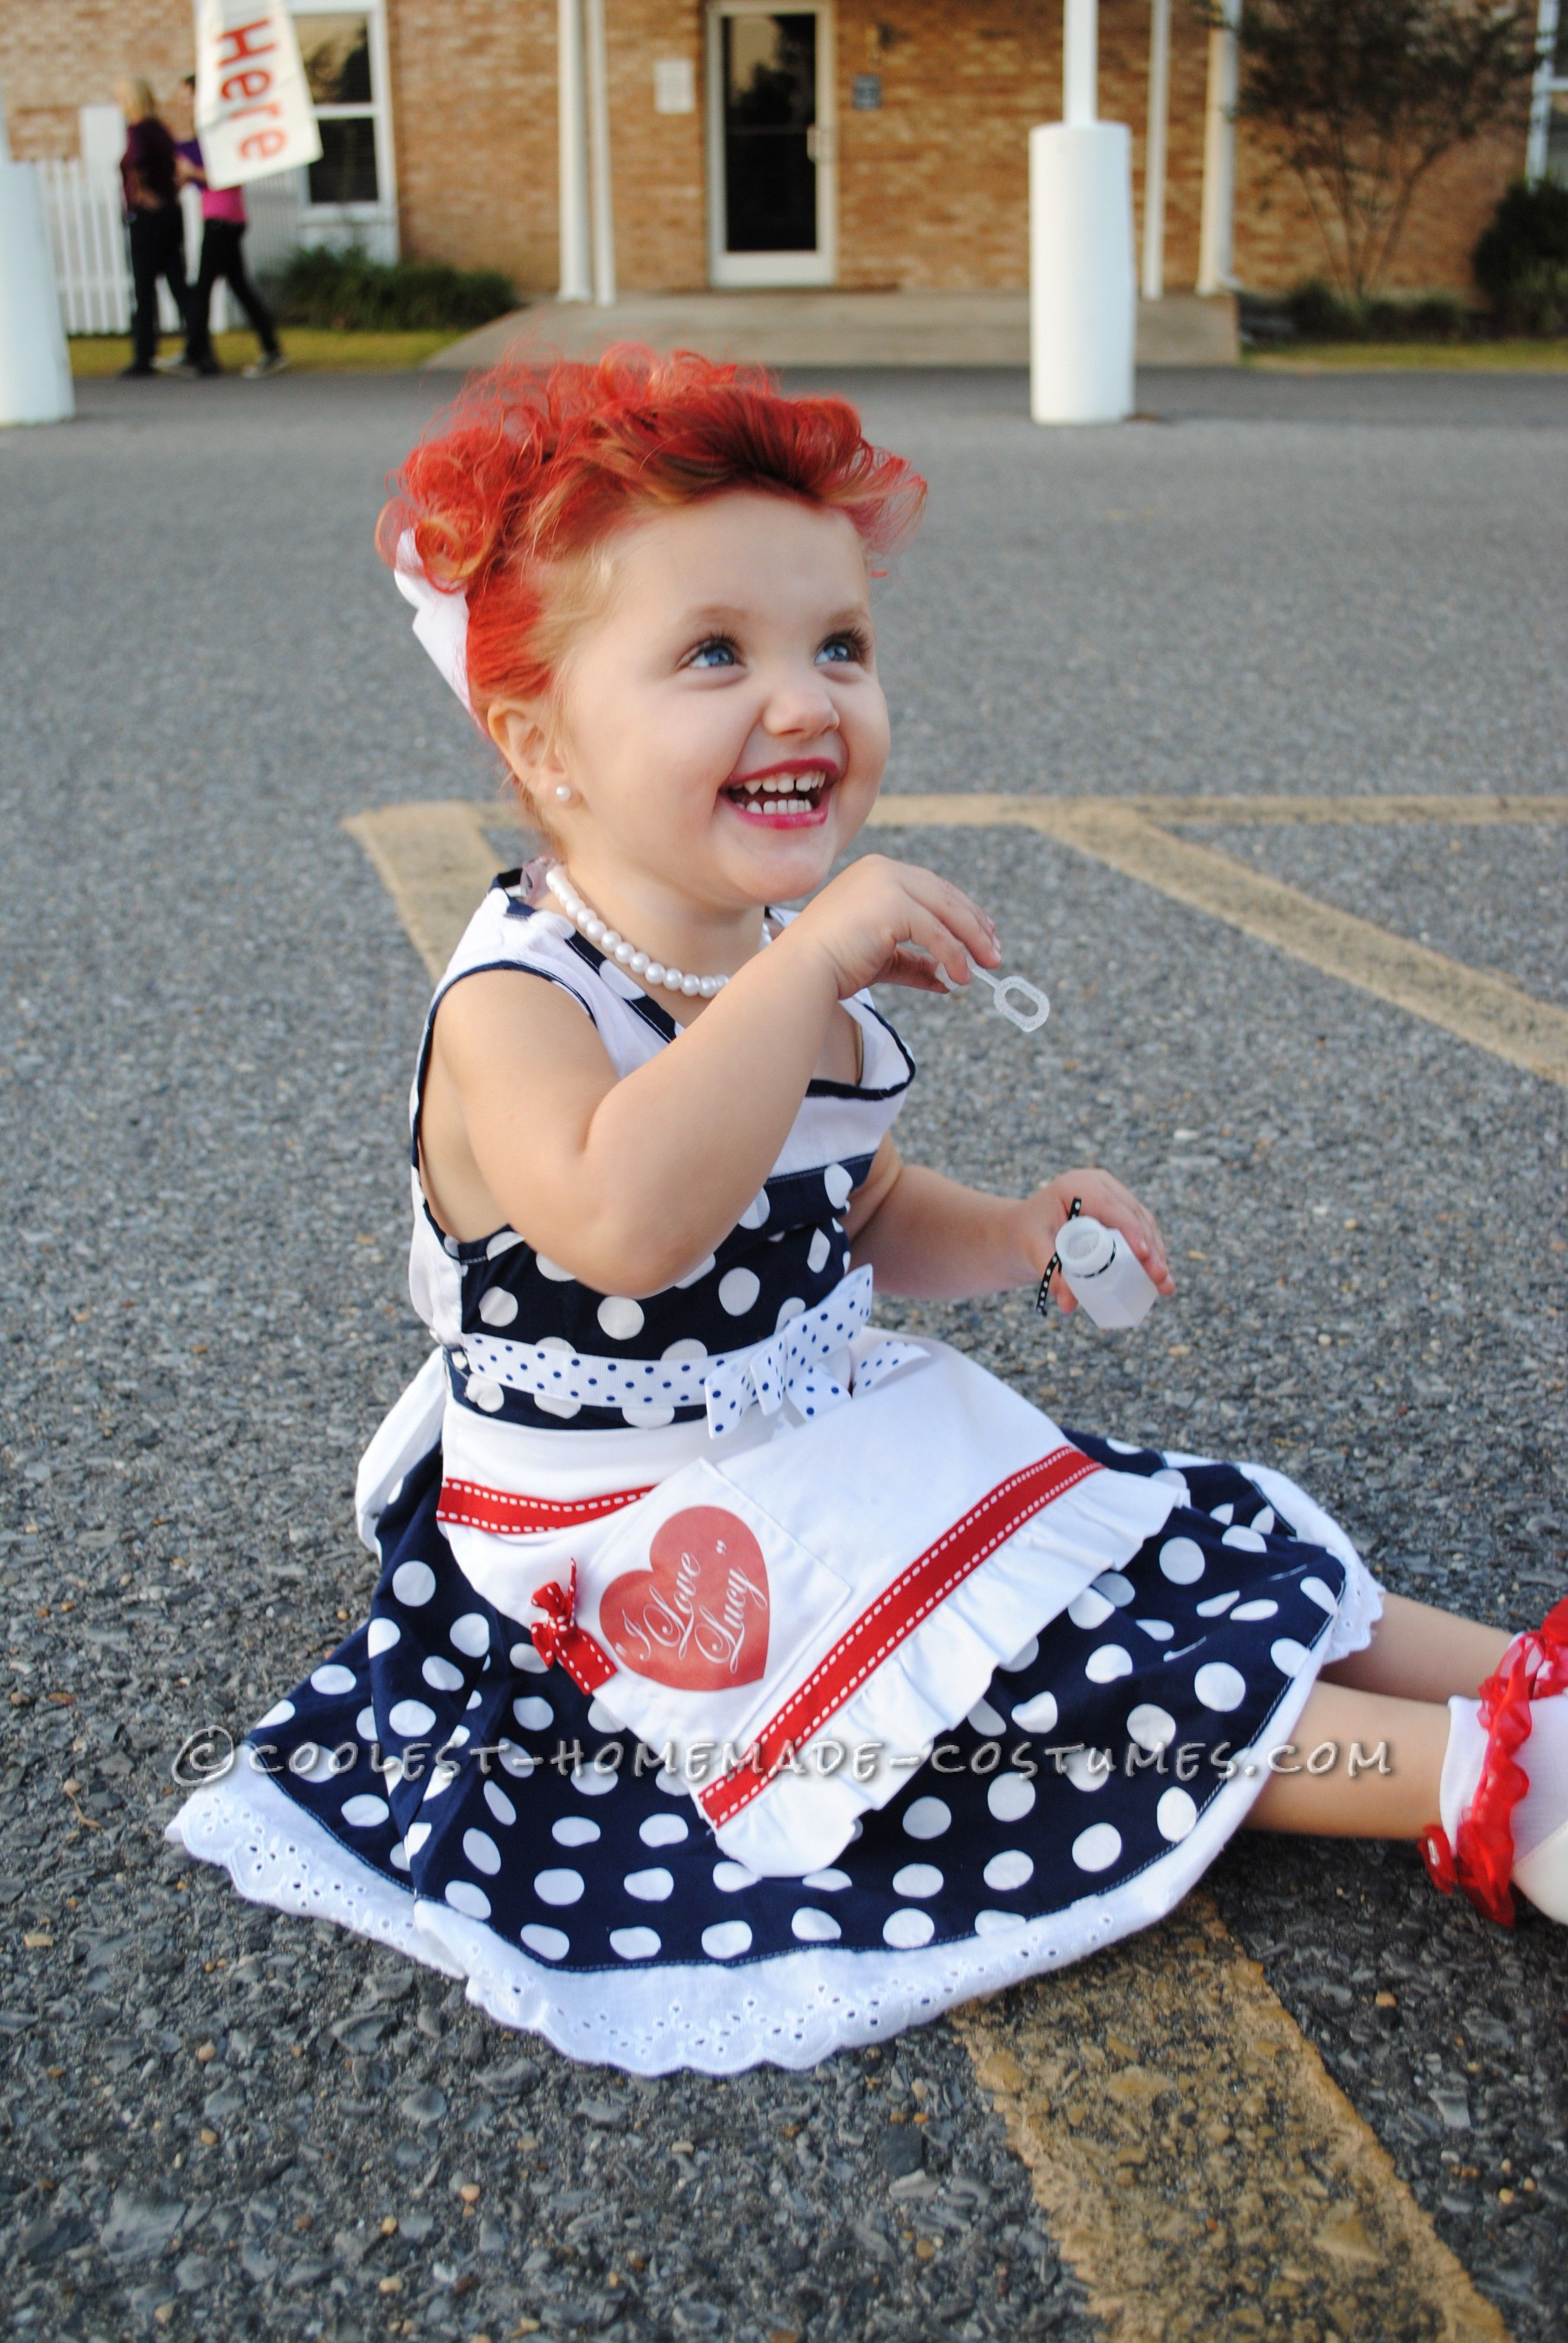 DIY Child Costumes
 Adorable "I Love Lucy" Homemade Costume for a Toddler